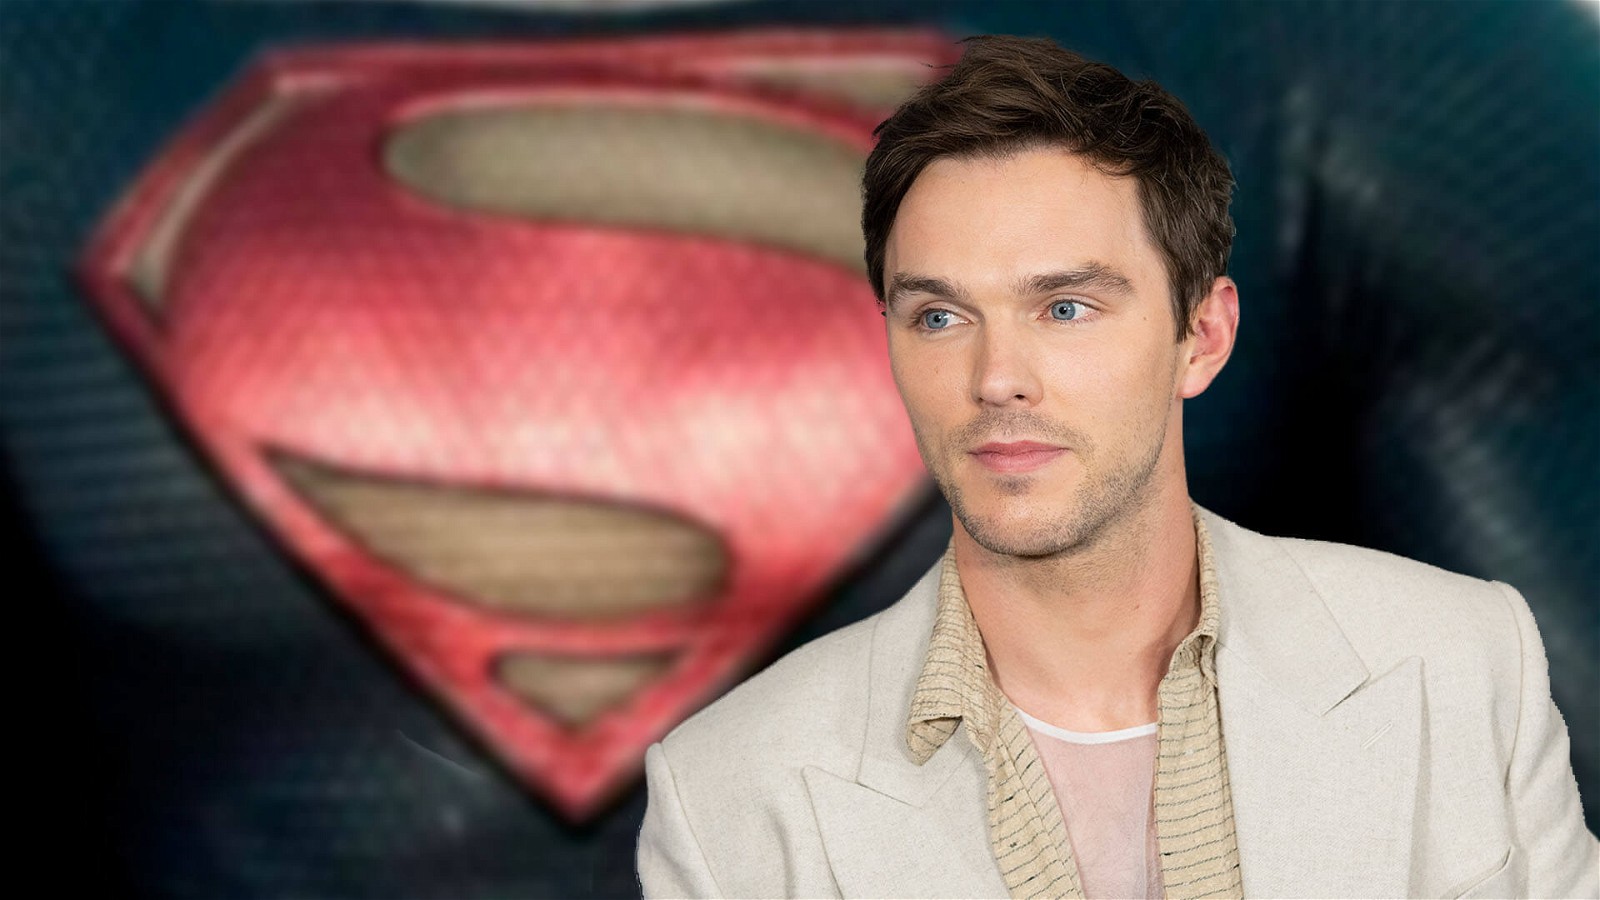 Nicholas Hoult was a leading contender for Superman